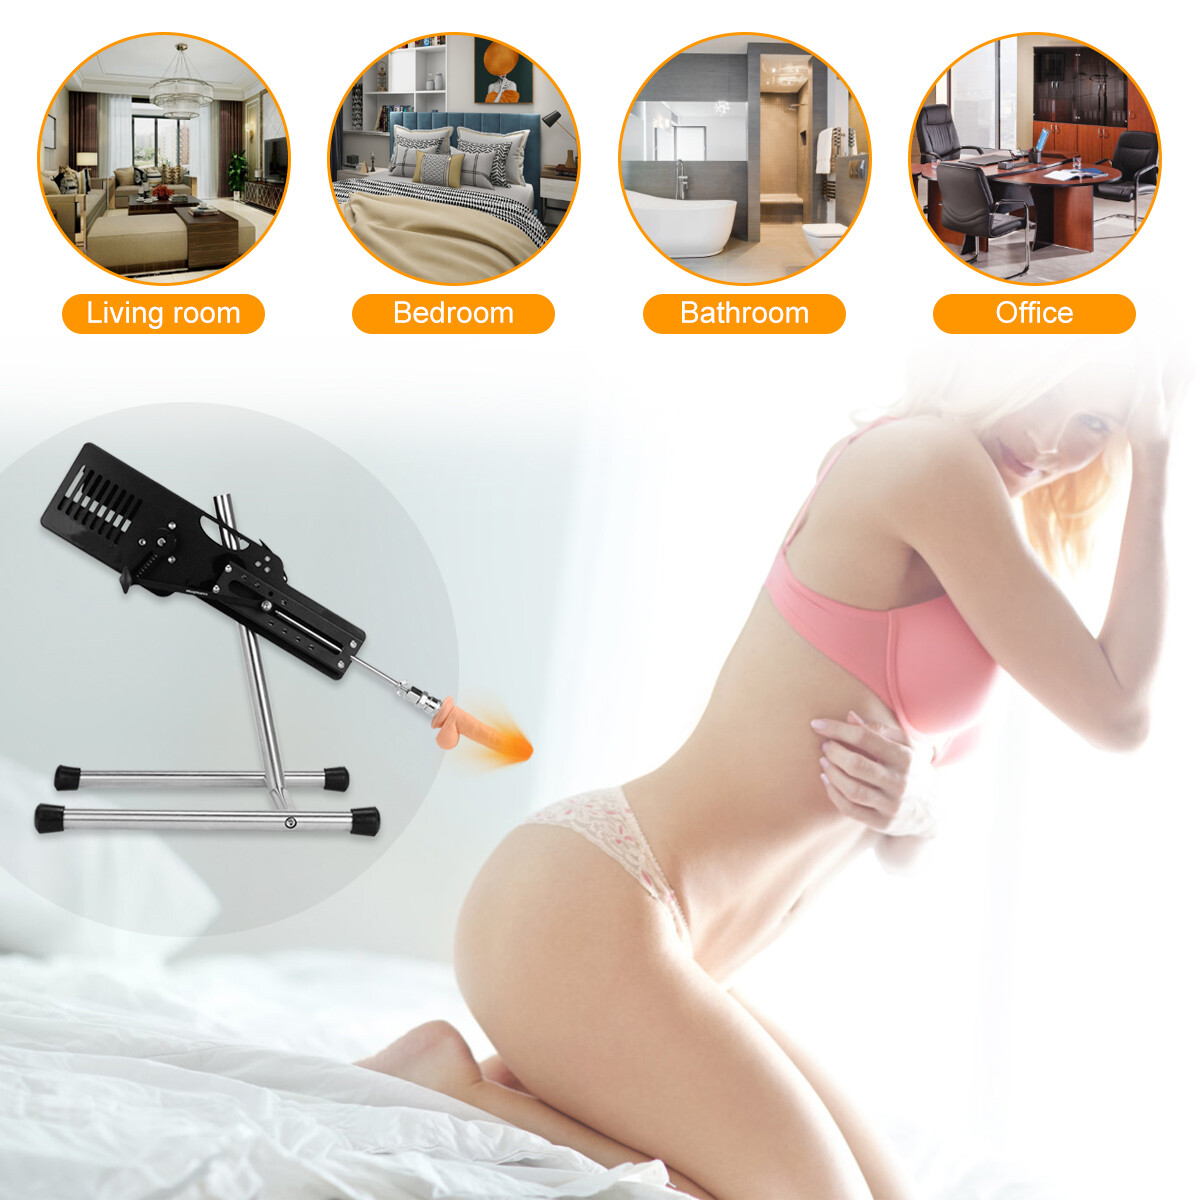 Updated Edition：6 Speed Smart Remote Control Sex Machine With 3 Pcs Big Dildos, Vagina Cup for Couple